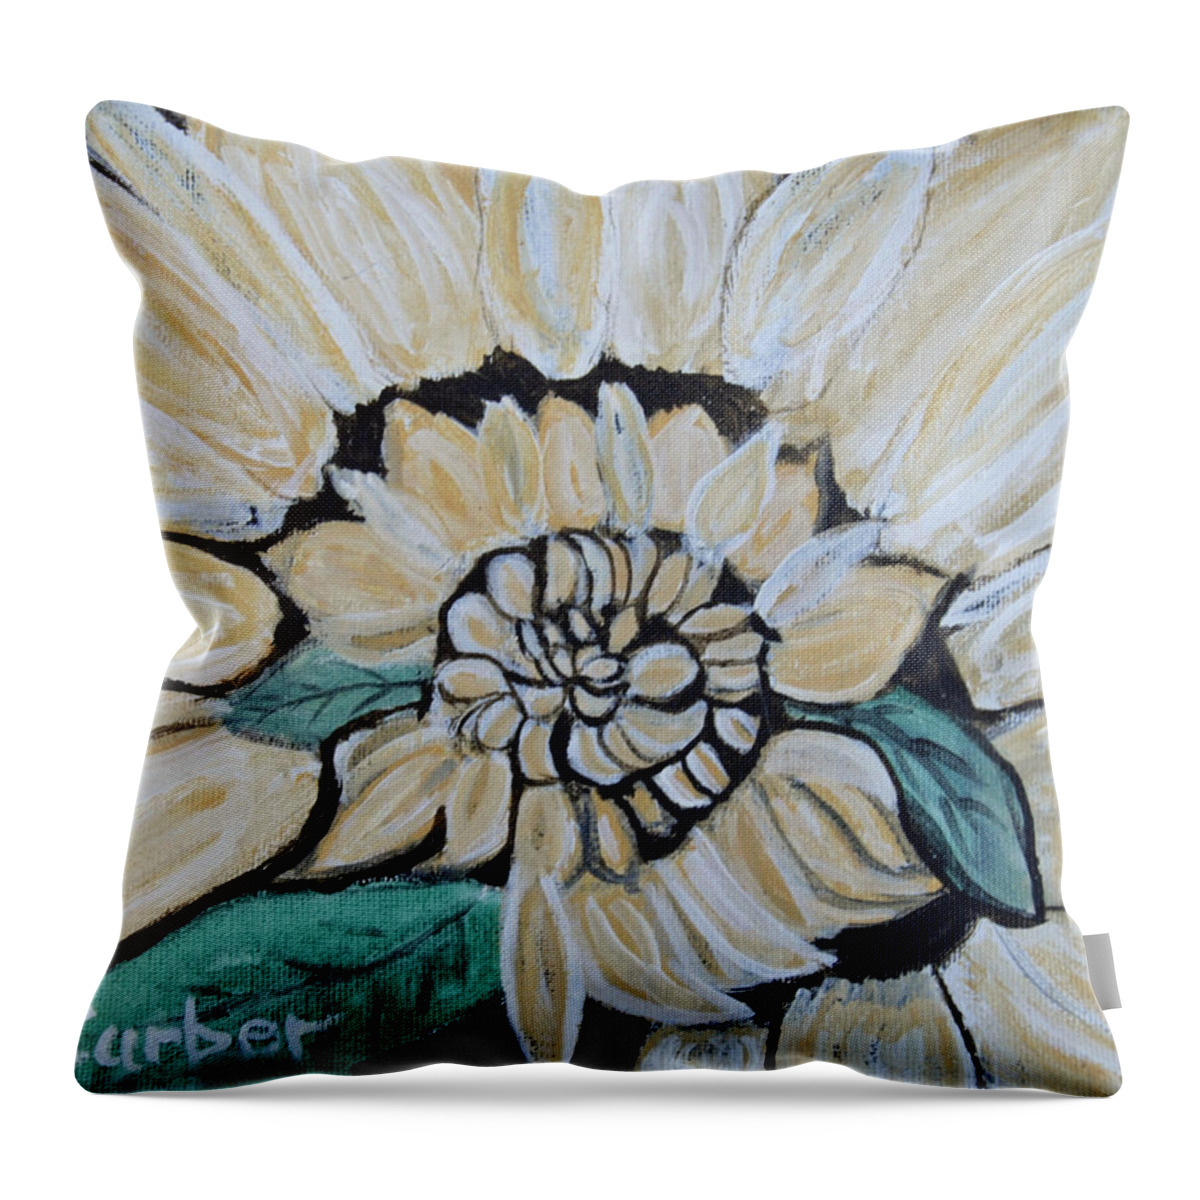 Yellow Throw Pillow featuring the painting Sunflower by Suzanne Surber